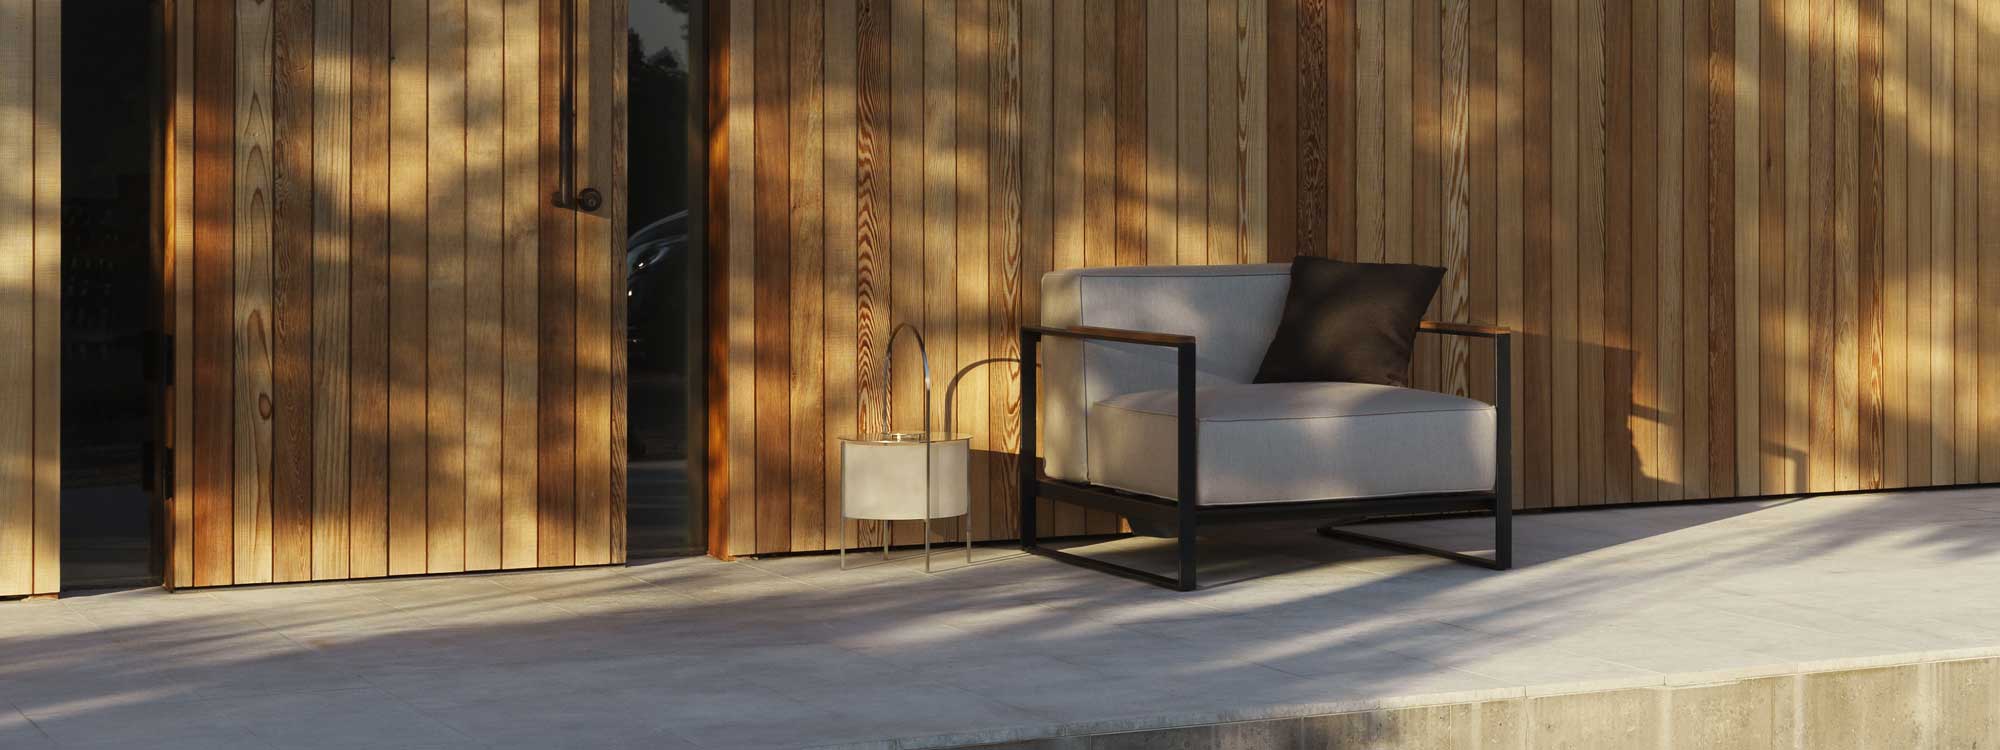 Moore modern garden sofa is a minimalist outdoor sofa in luxury quality garden furniture materials by Roshults designer exterior furniture